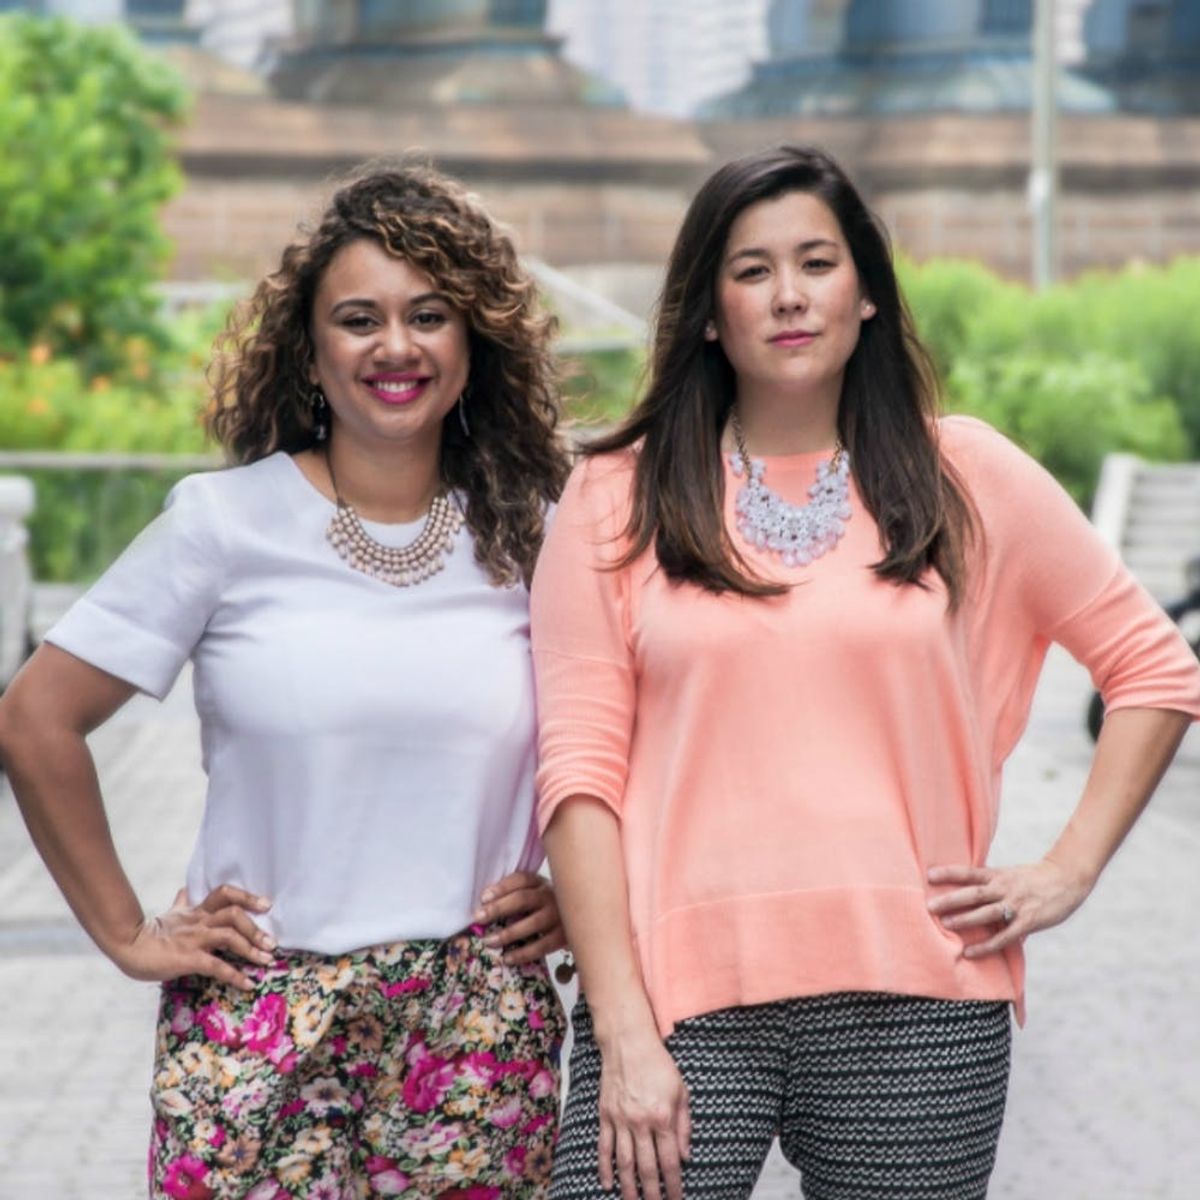 These Two Women Started a Business to Improve Your Daily Well-Being